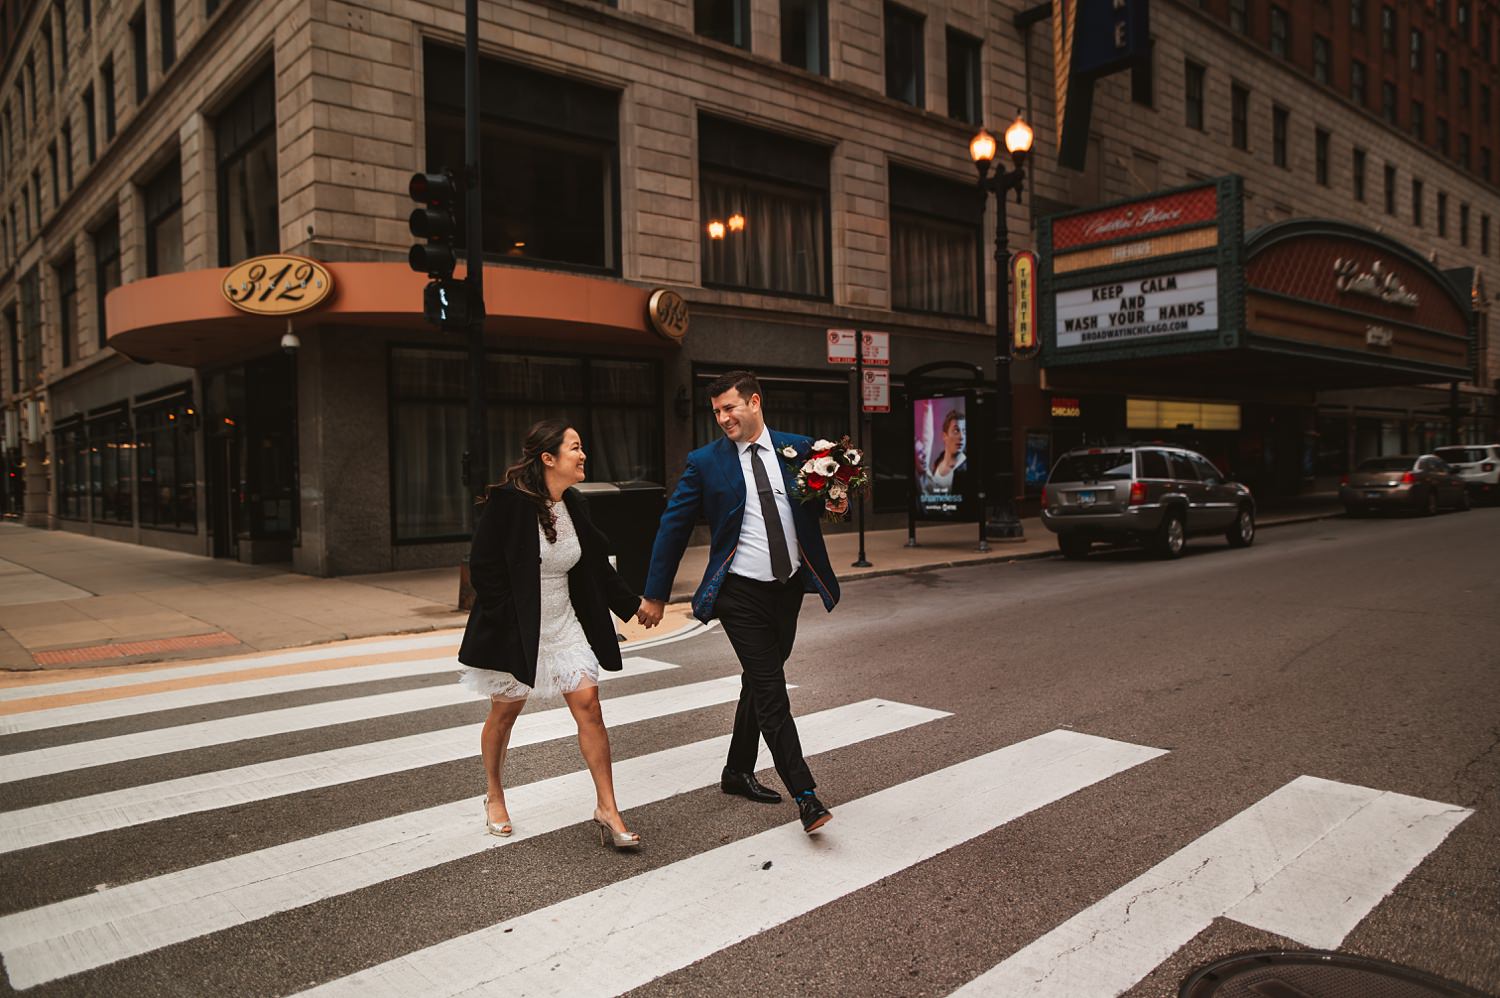 Chicago Courthouse Elopement wedding - The Adamkovi, city hall, photos in the loop area